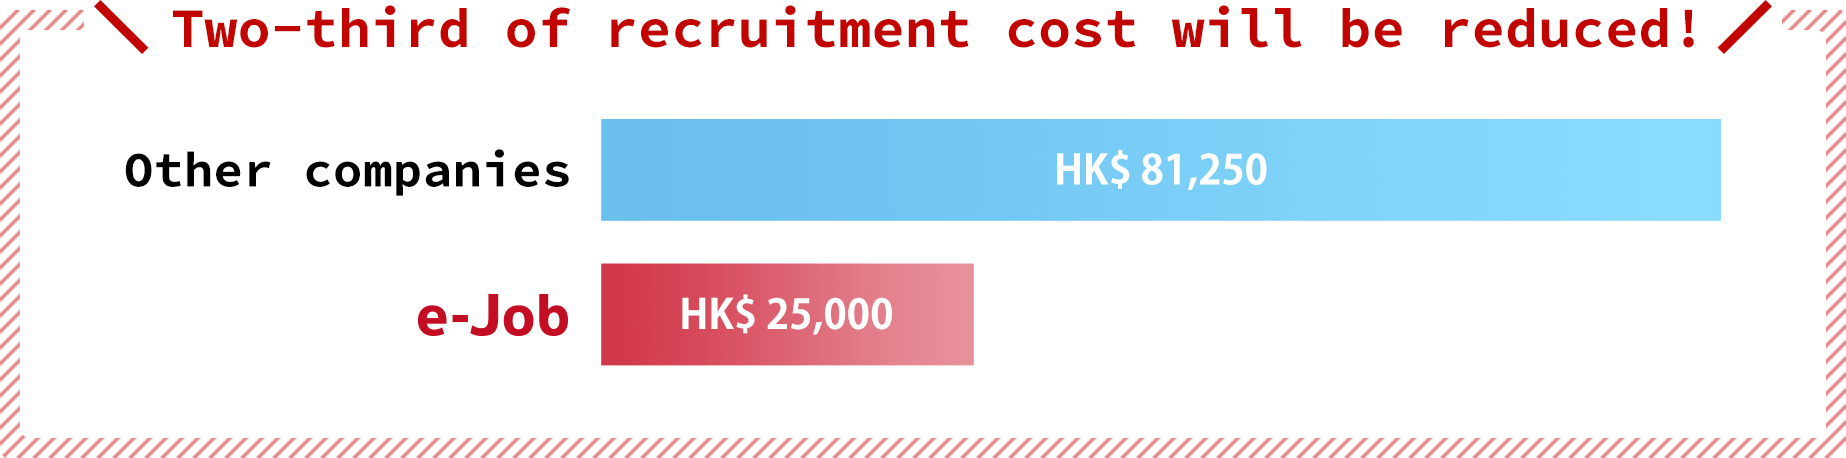 Two-third of recruitment cost will be reduced!